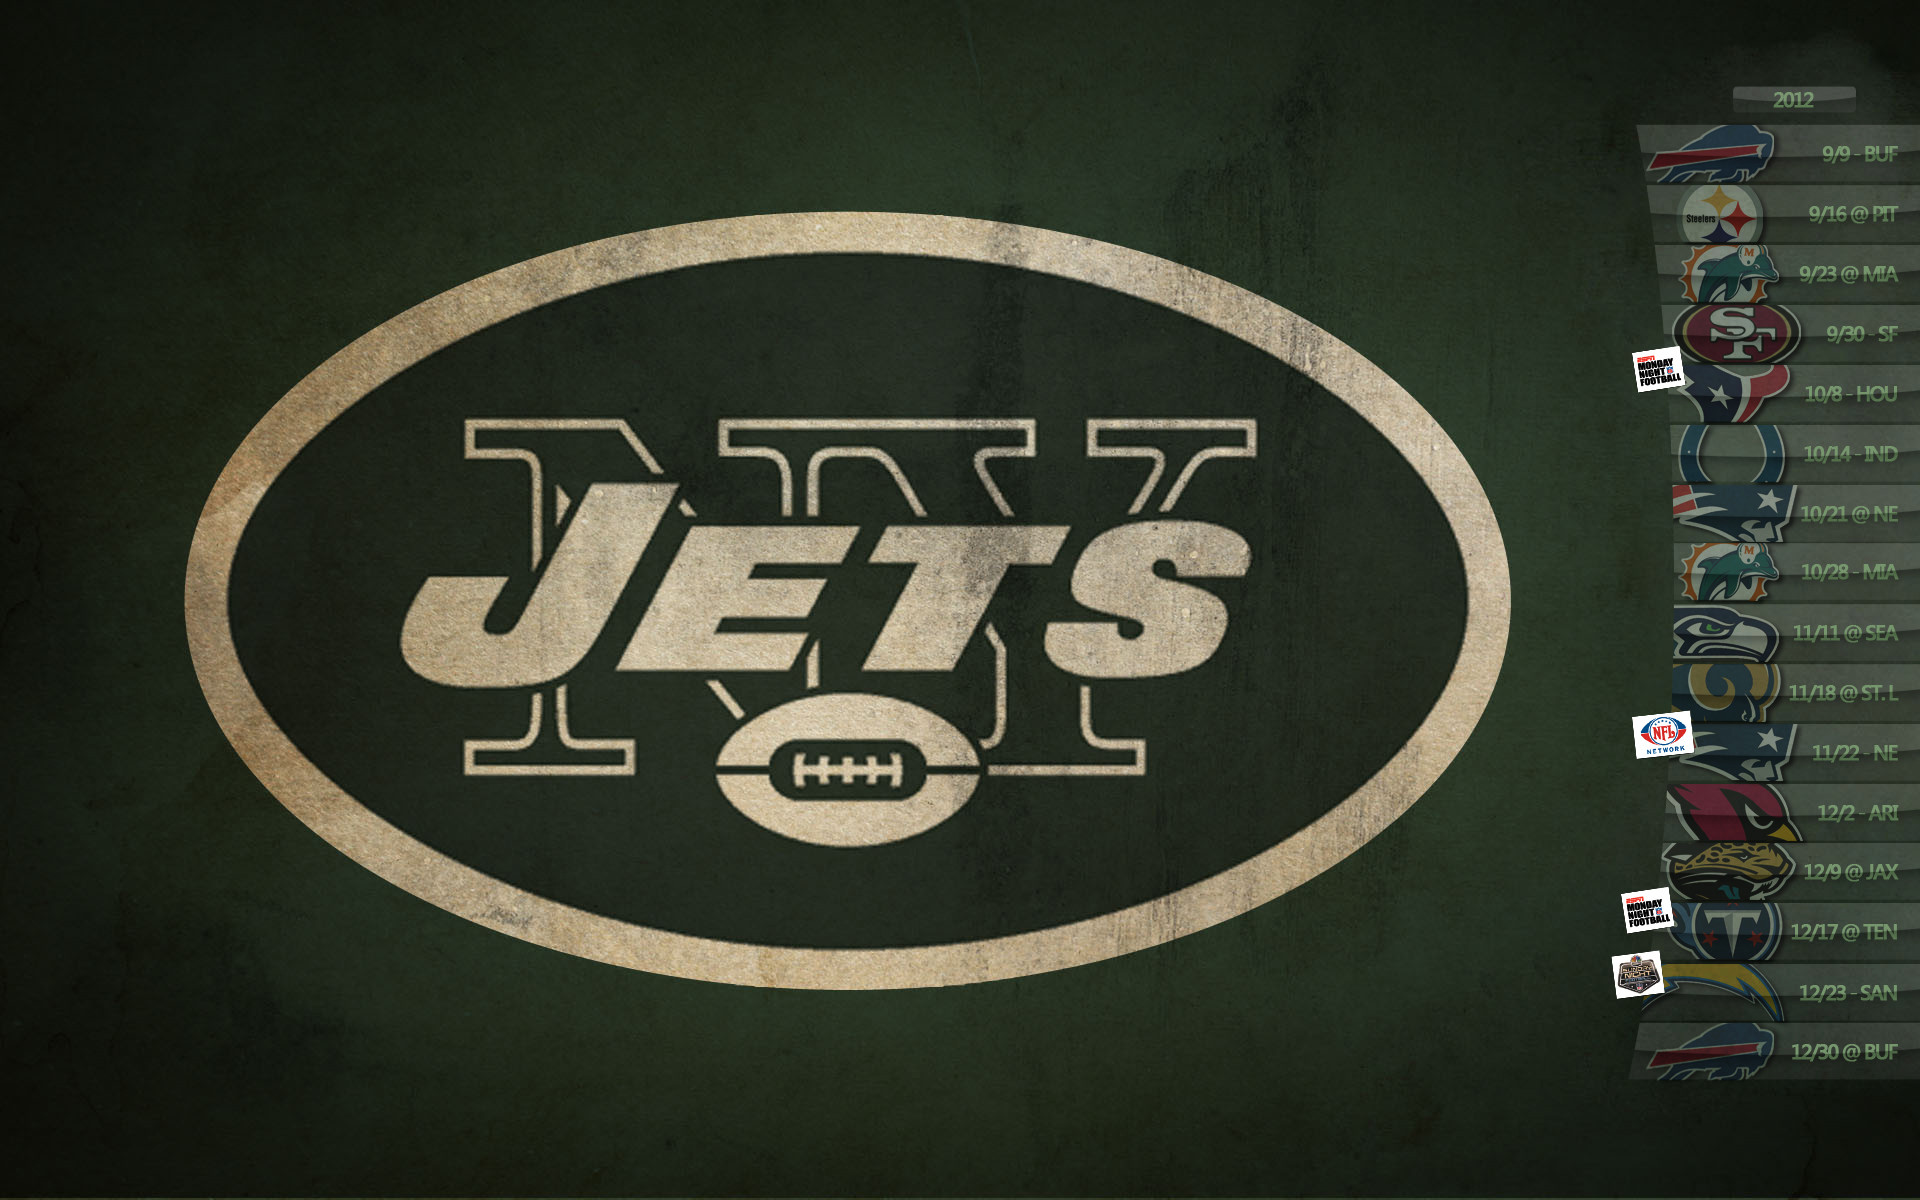 New Jets Wallpaper With Schedule York Message Board